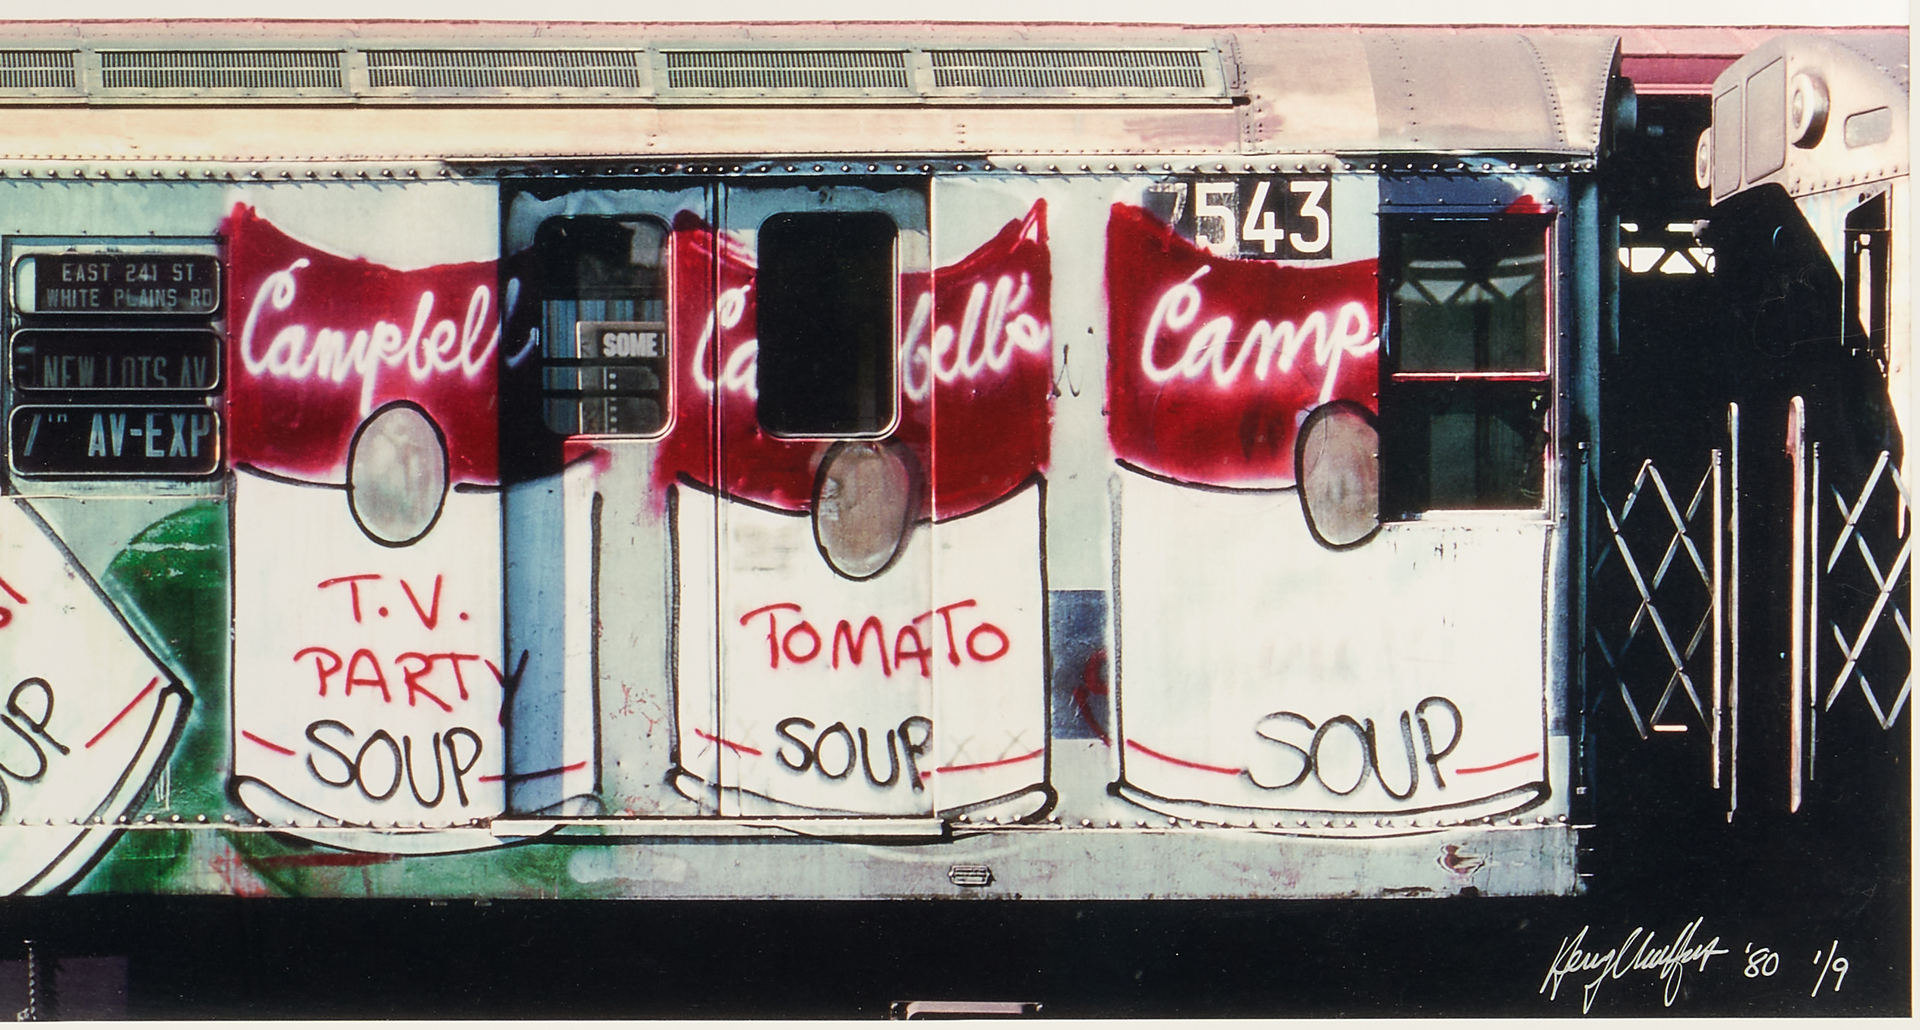 Lot 621: Henry Chalfant, Campbell's Soup by Fred Brothwaite, 1980